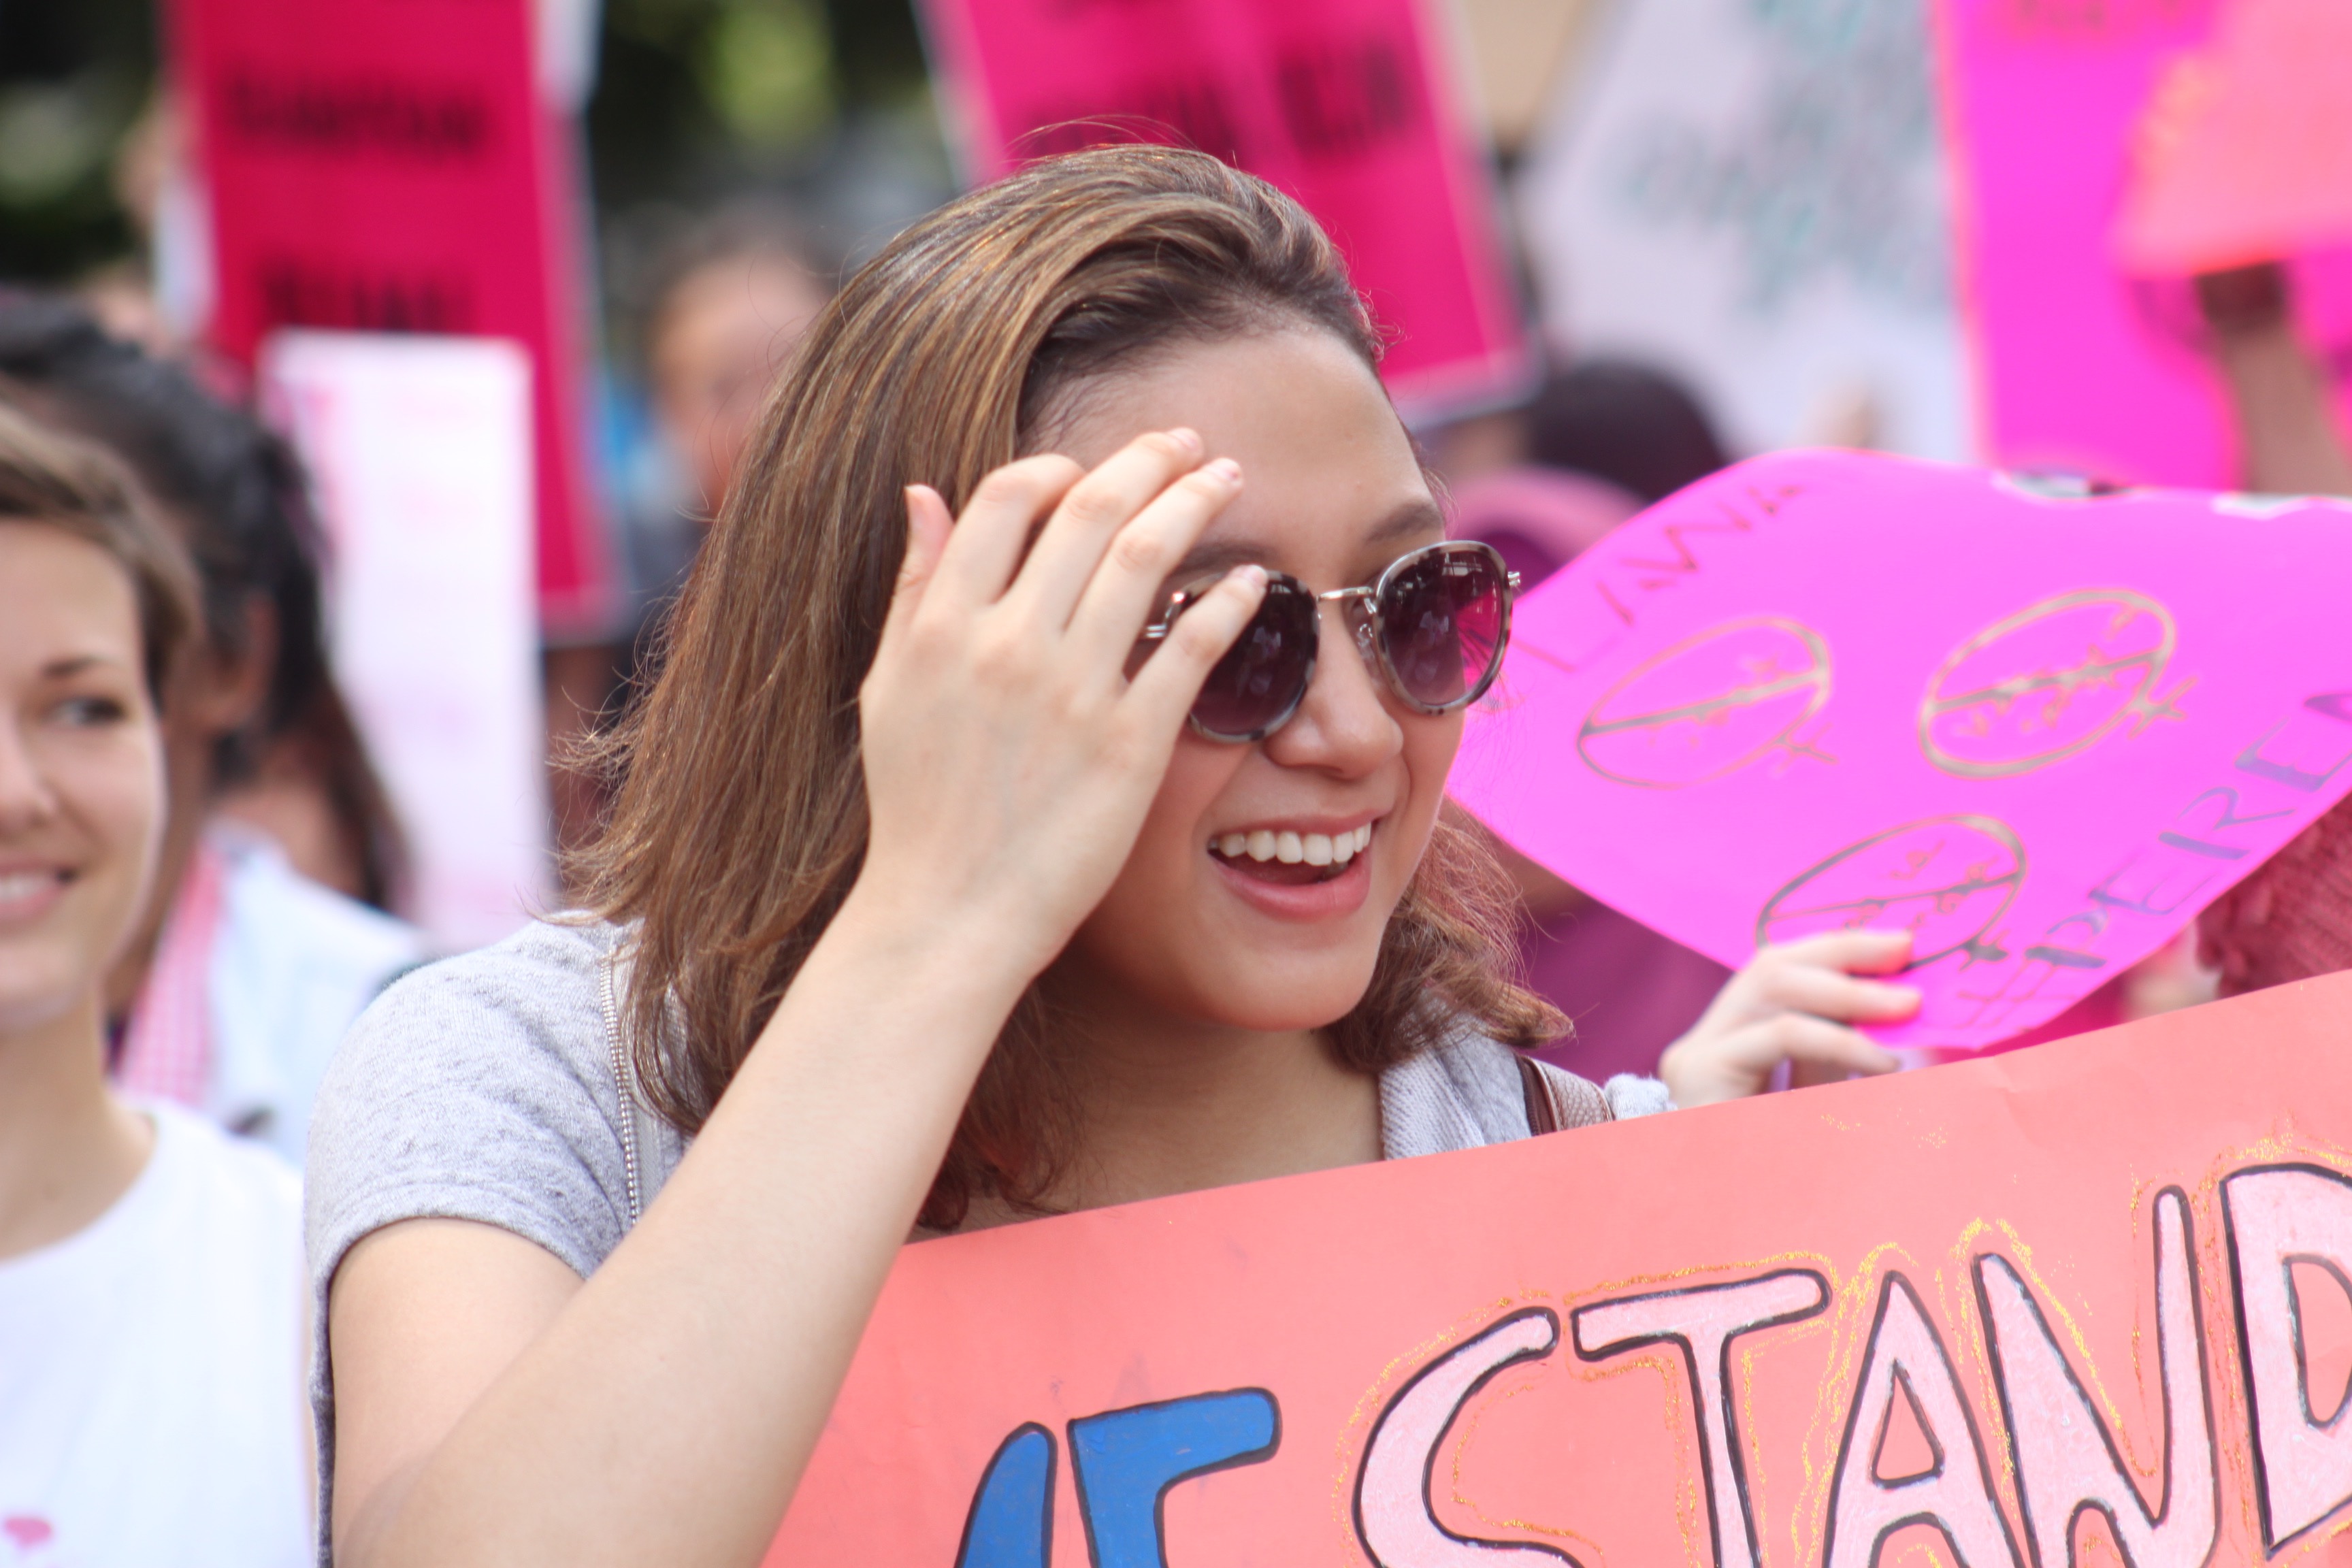 In Photos Creative Posters Sea Of Pink At Indonesia Womens March